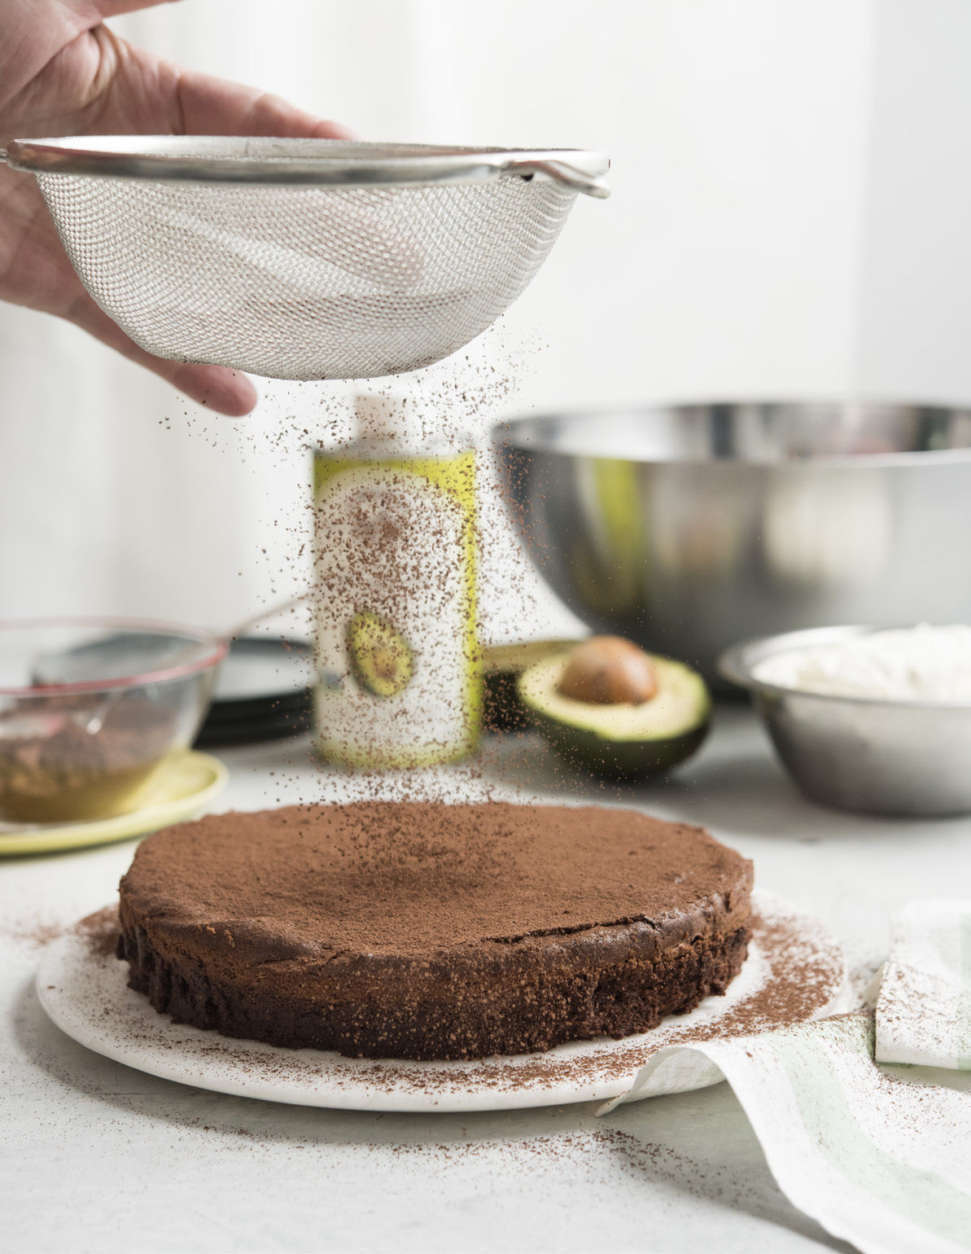 The "Sheba from Queens Cake" is Yosses' take on Julia Child's Queen of Sheba cake. It has 75 percent less sugar and substitutes avocado for butter. (Courtesy Penguin Random House/Evan Sung)